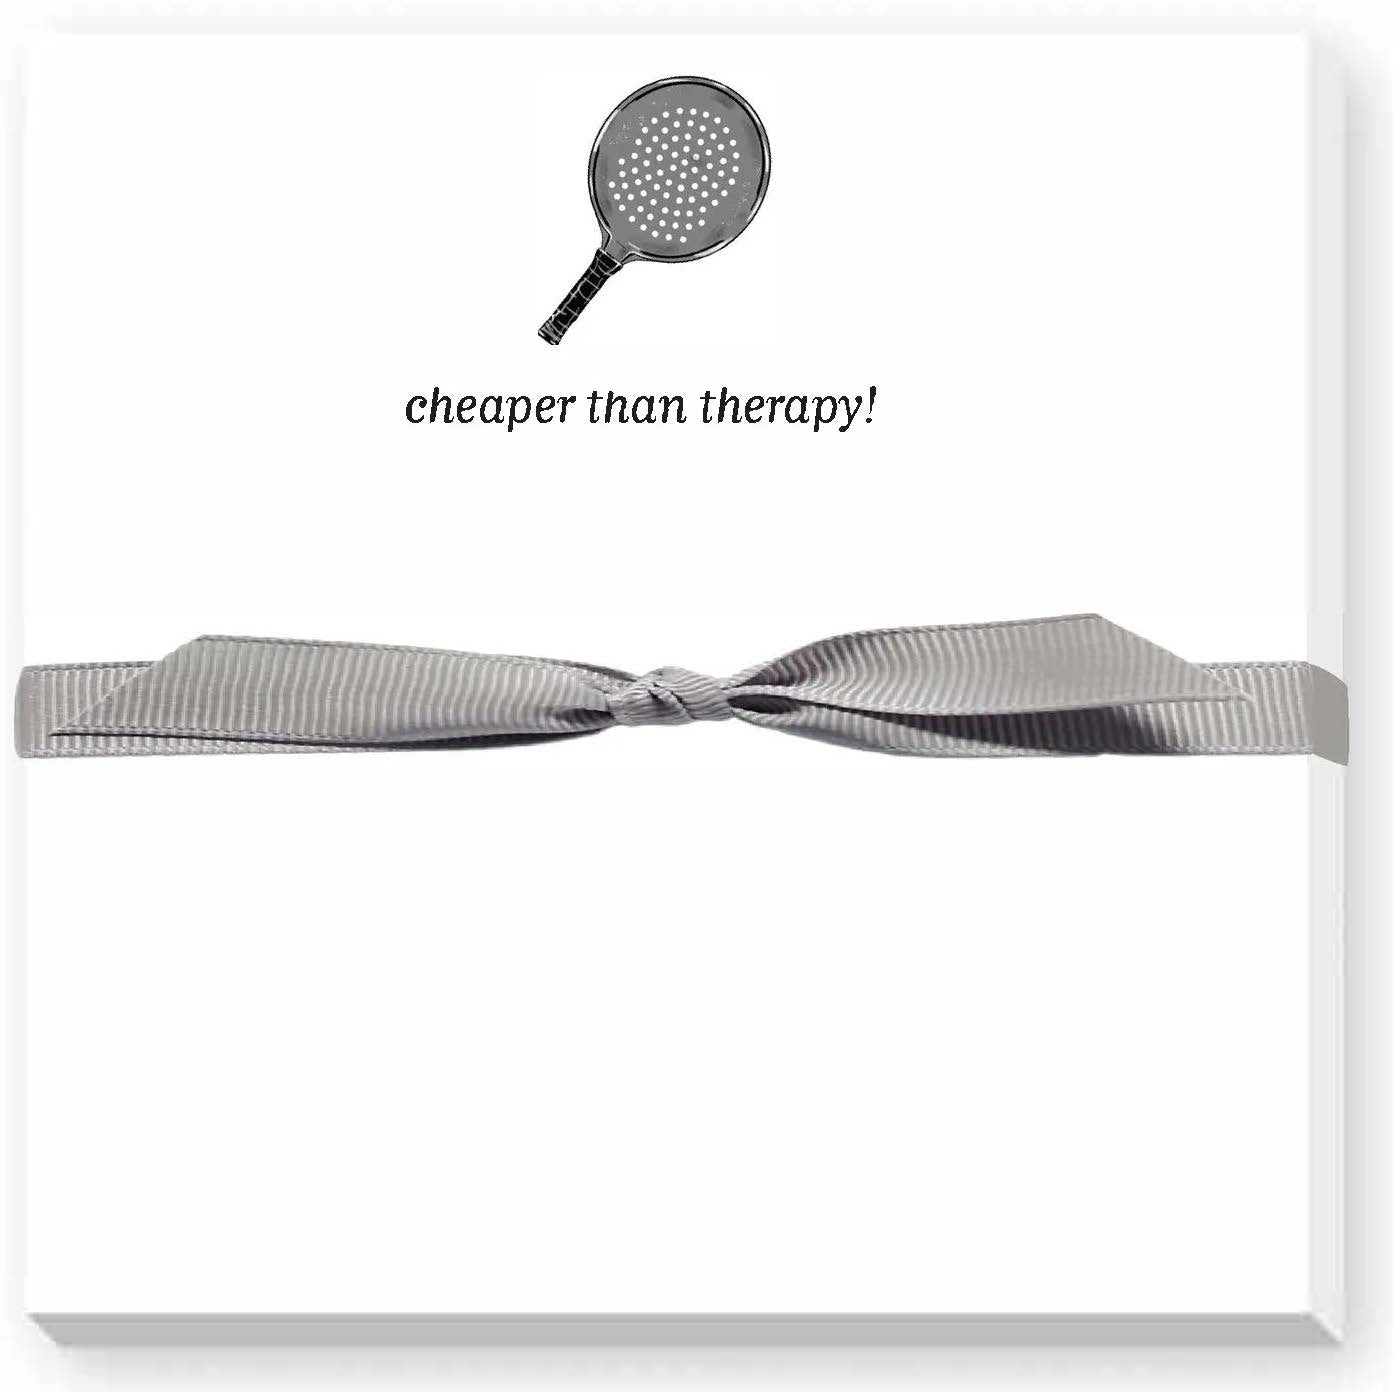 5.5'x5.5" notepad with image of platform tennis paddle and slogan Cheaper than Therapy!